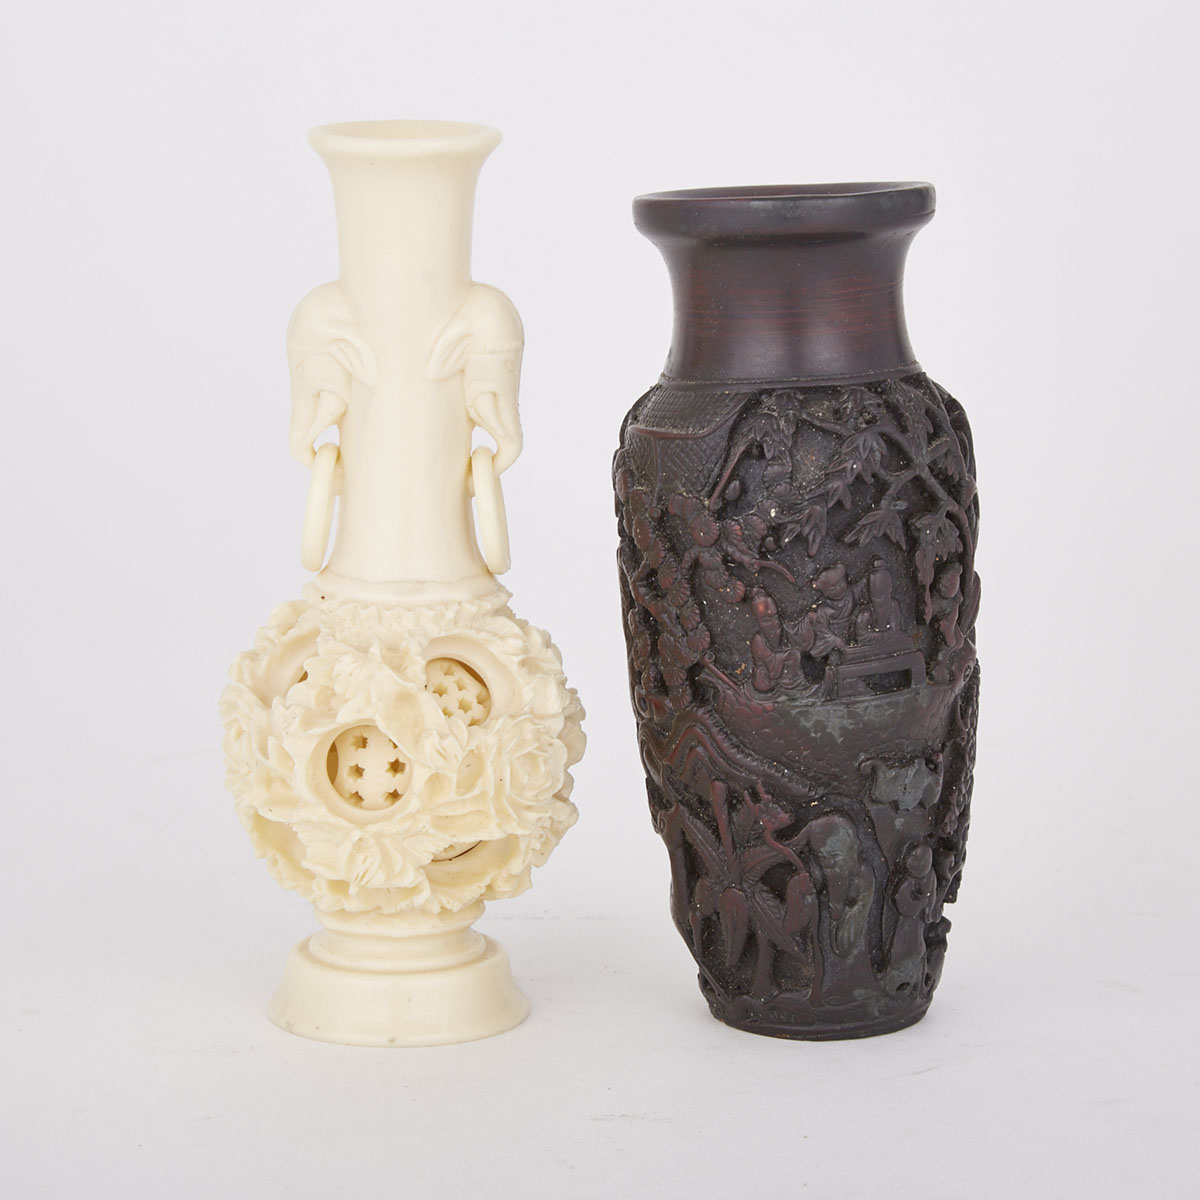 Two Carved Vases, Early 20th Century